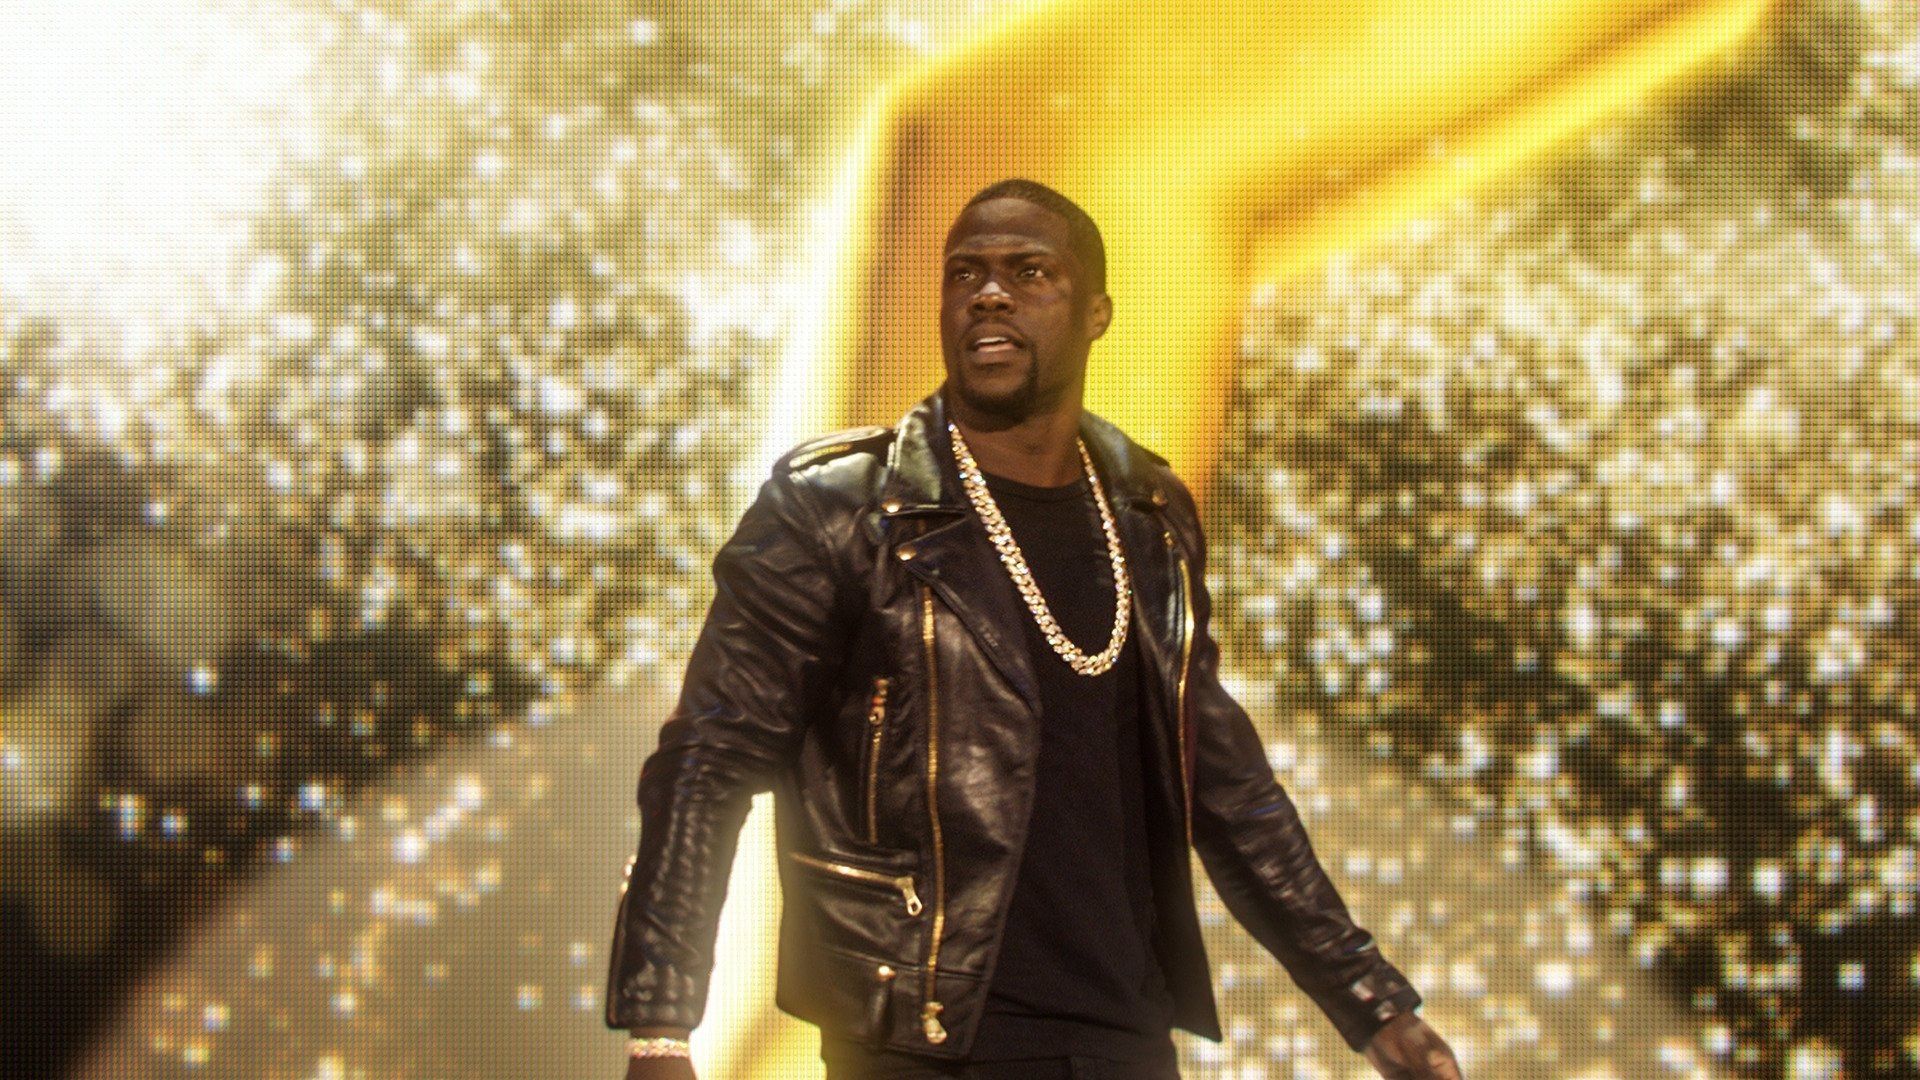 Kevin Hart: What Now? Backdrop